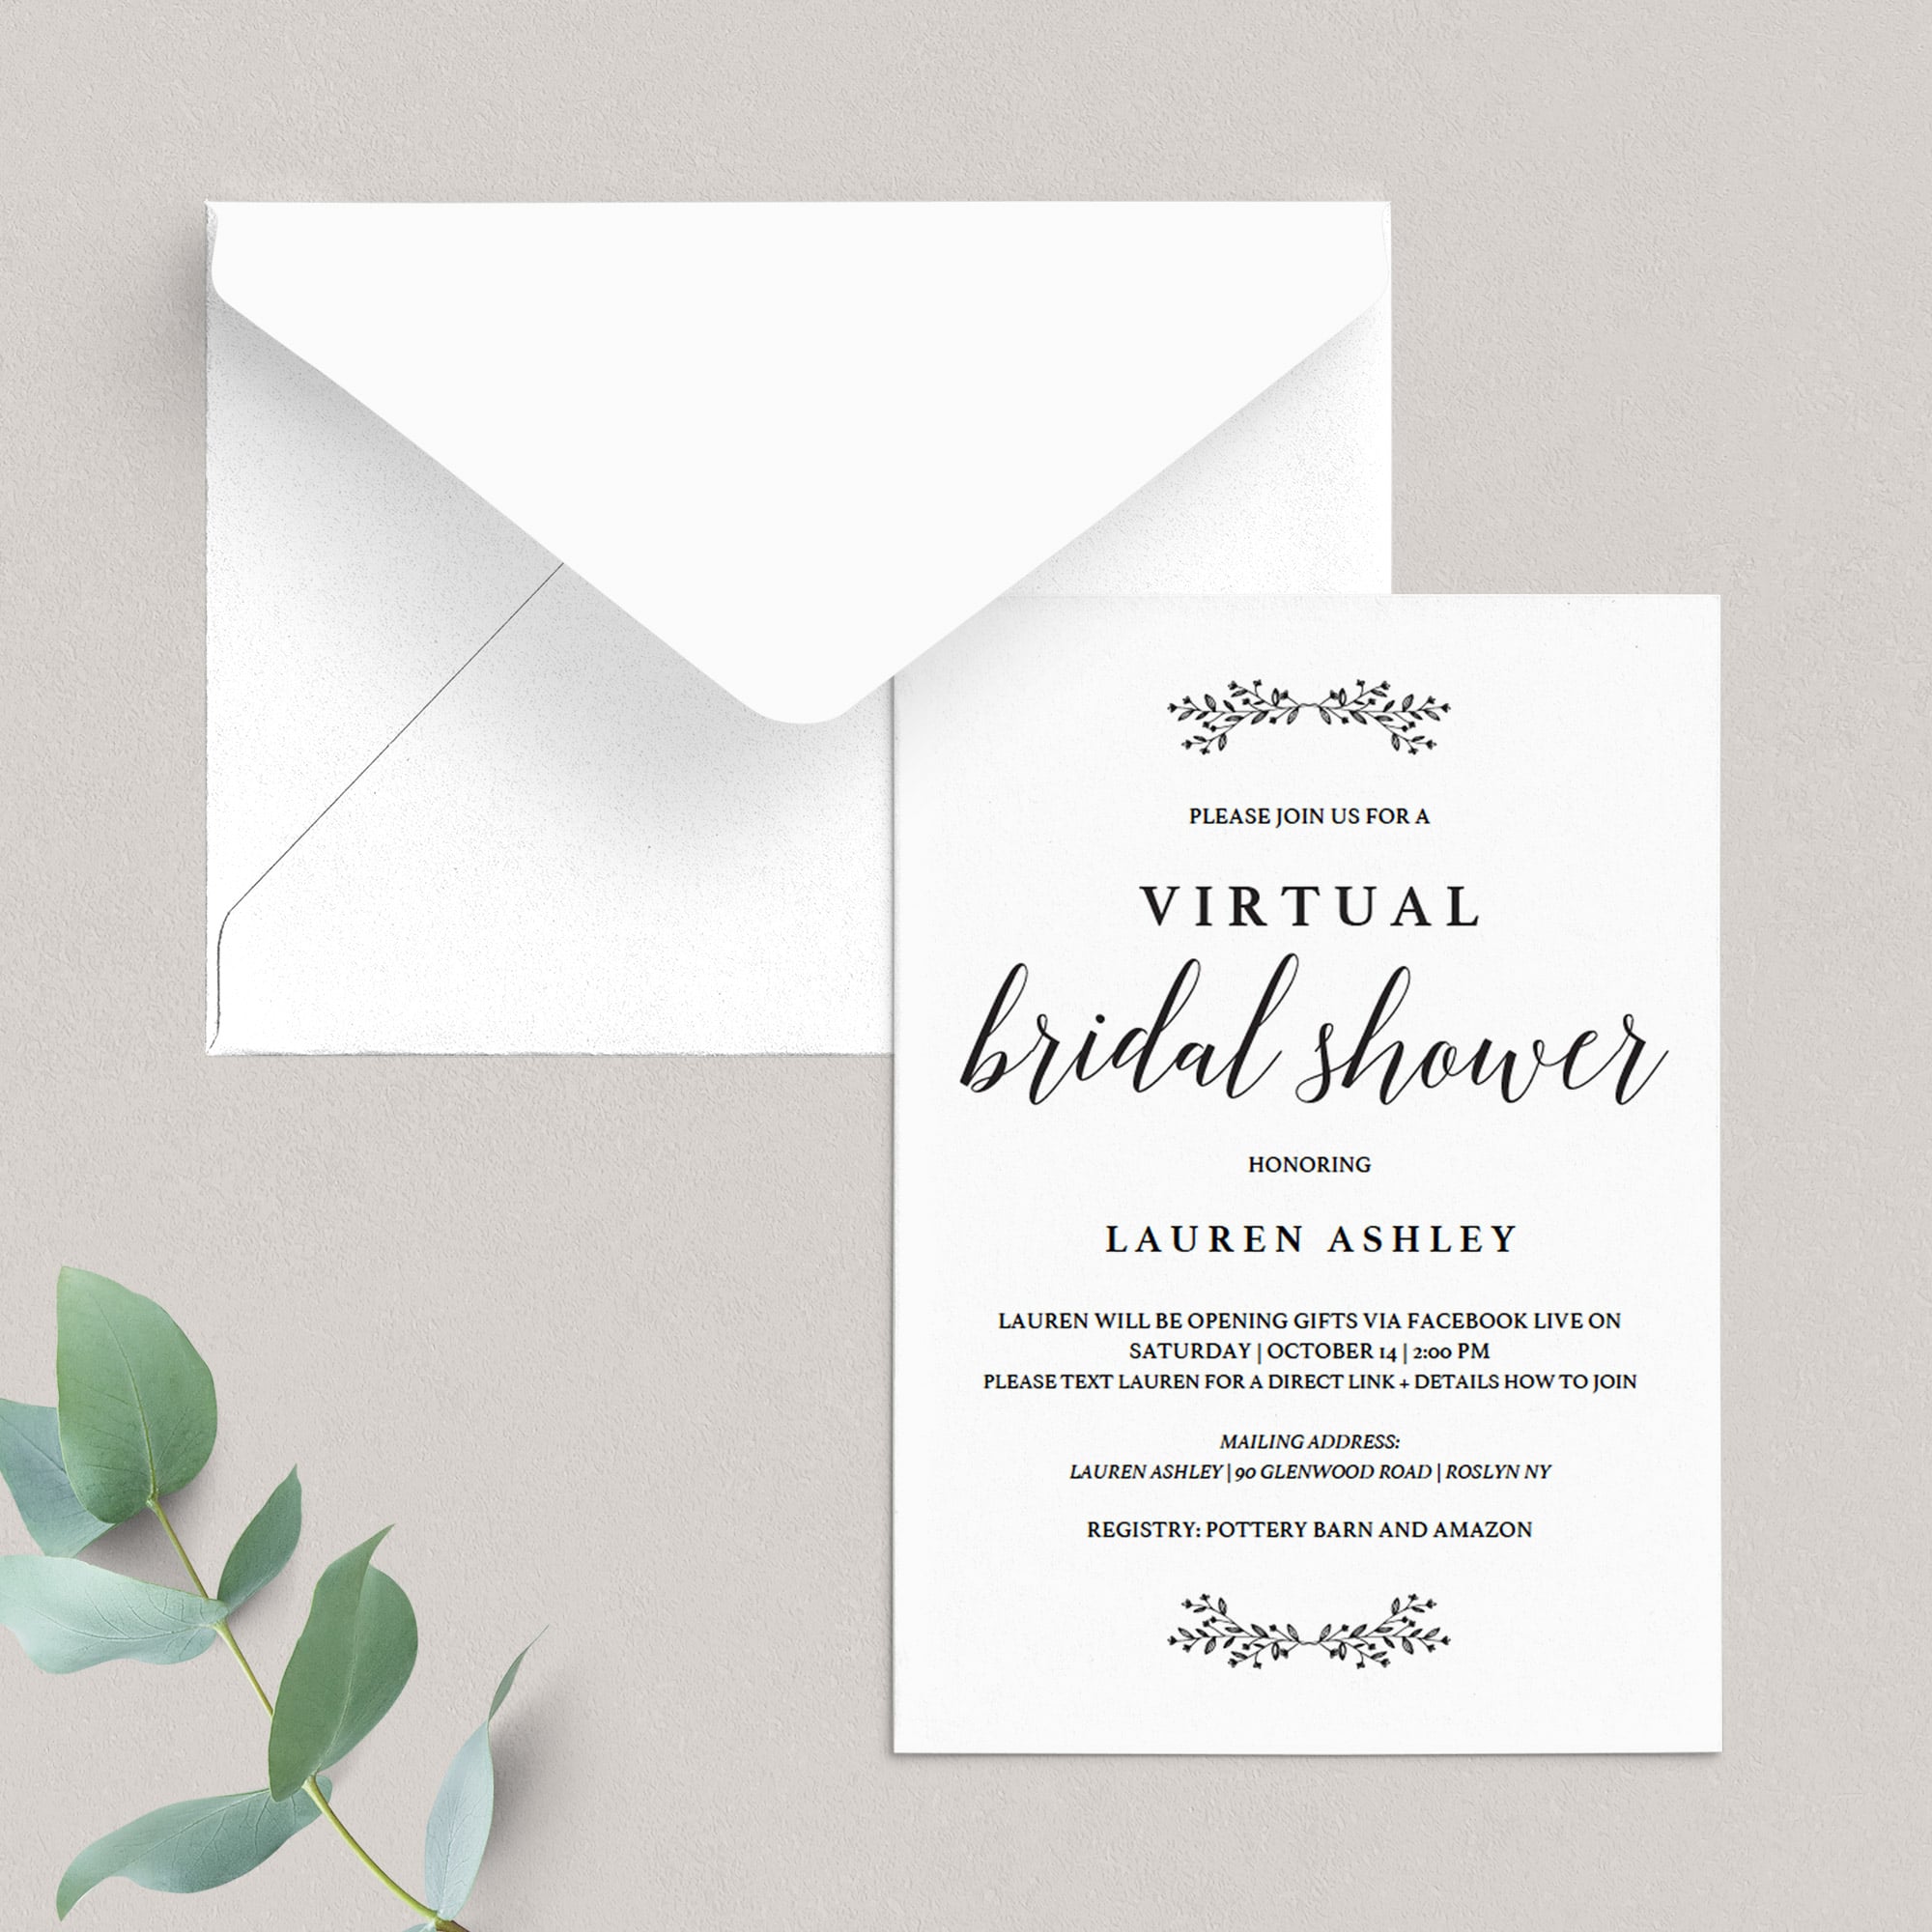 Editable Virtual Bridal Shower Invite Rustic Chic by LittleSizzle